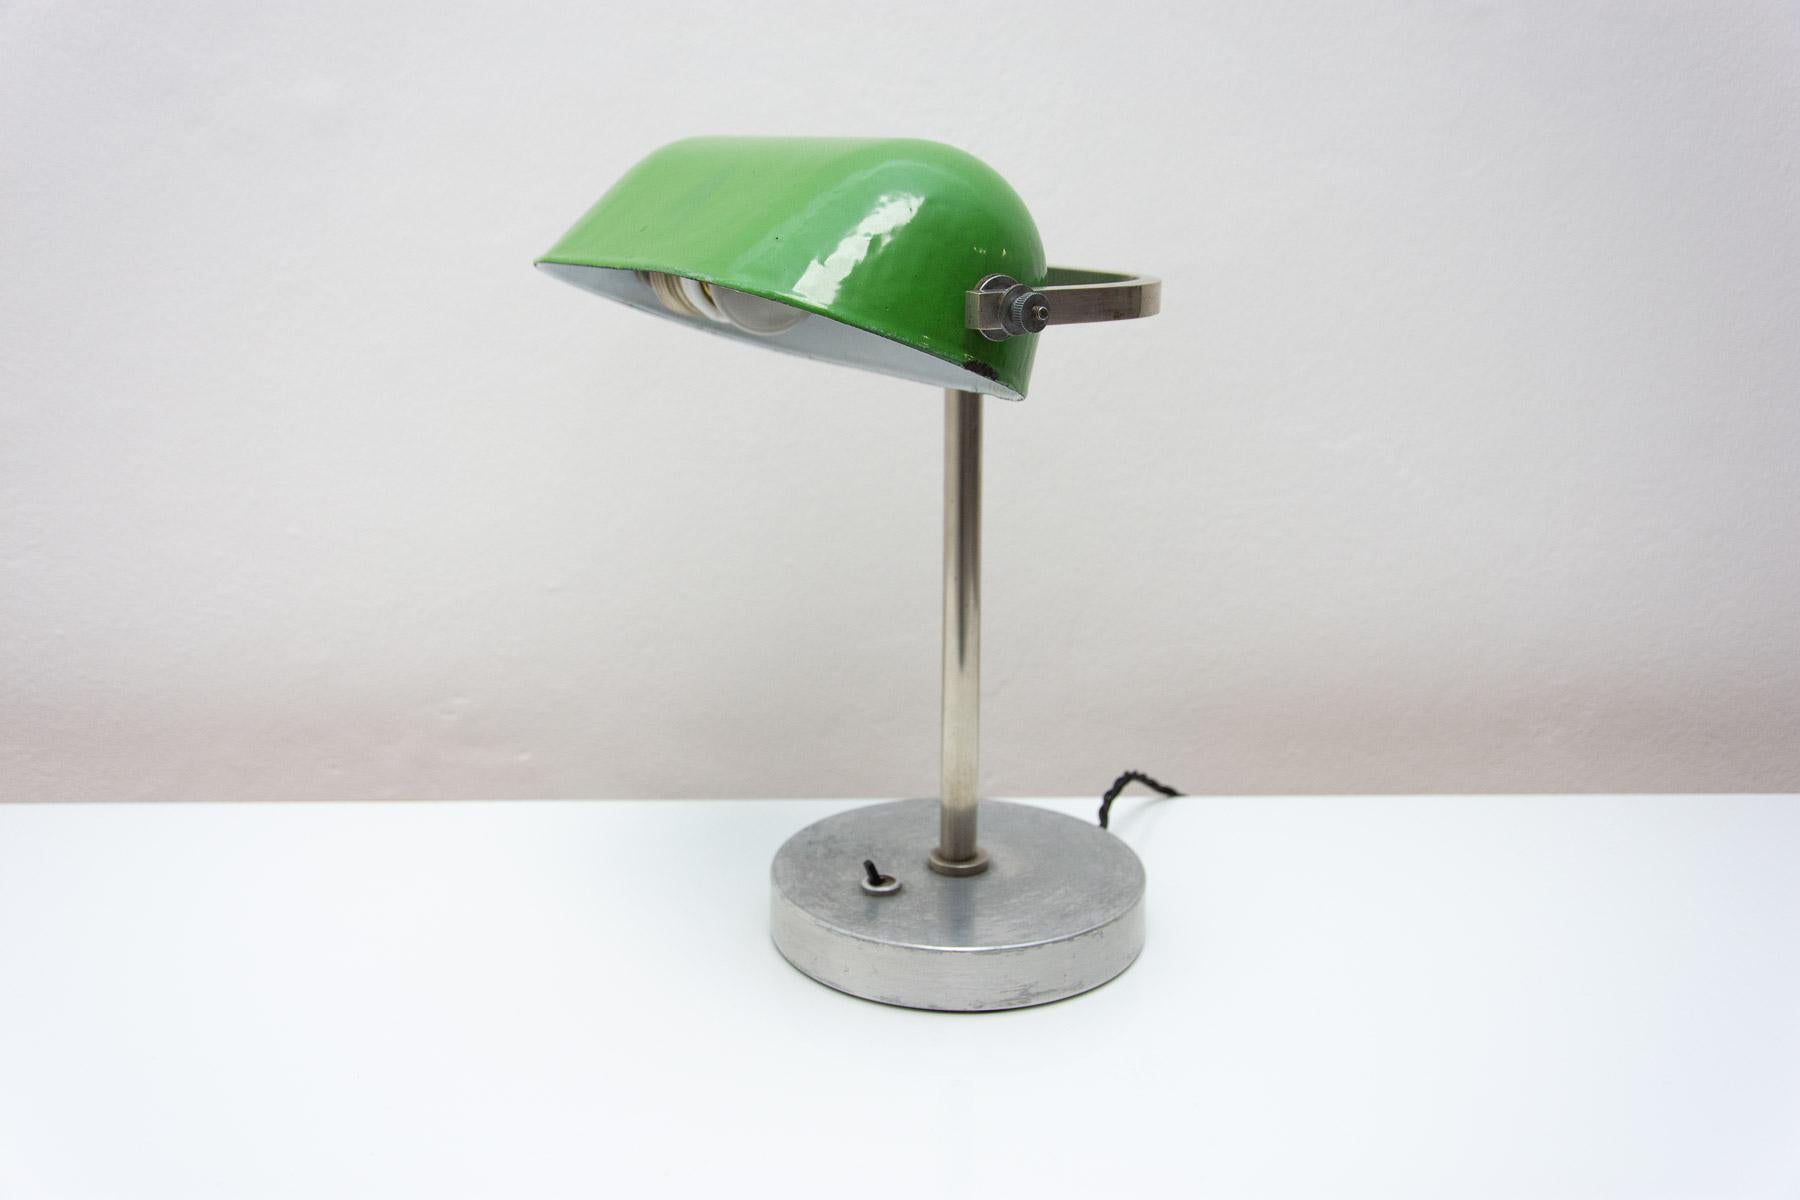 Characteristic desk lamp, Bauhaus style, designed in 1930. The lamp has a chromium plated base and an enameled metal cap. The arm and cap are adjustable. Fully adjustable and a fantastic look that fits in many interiors. In good Vintage condition,